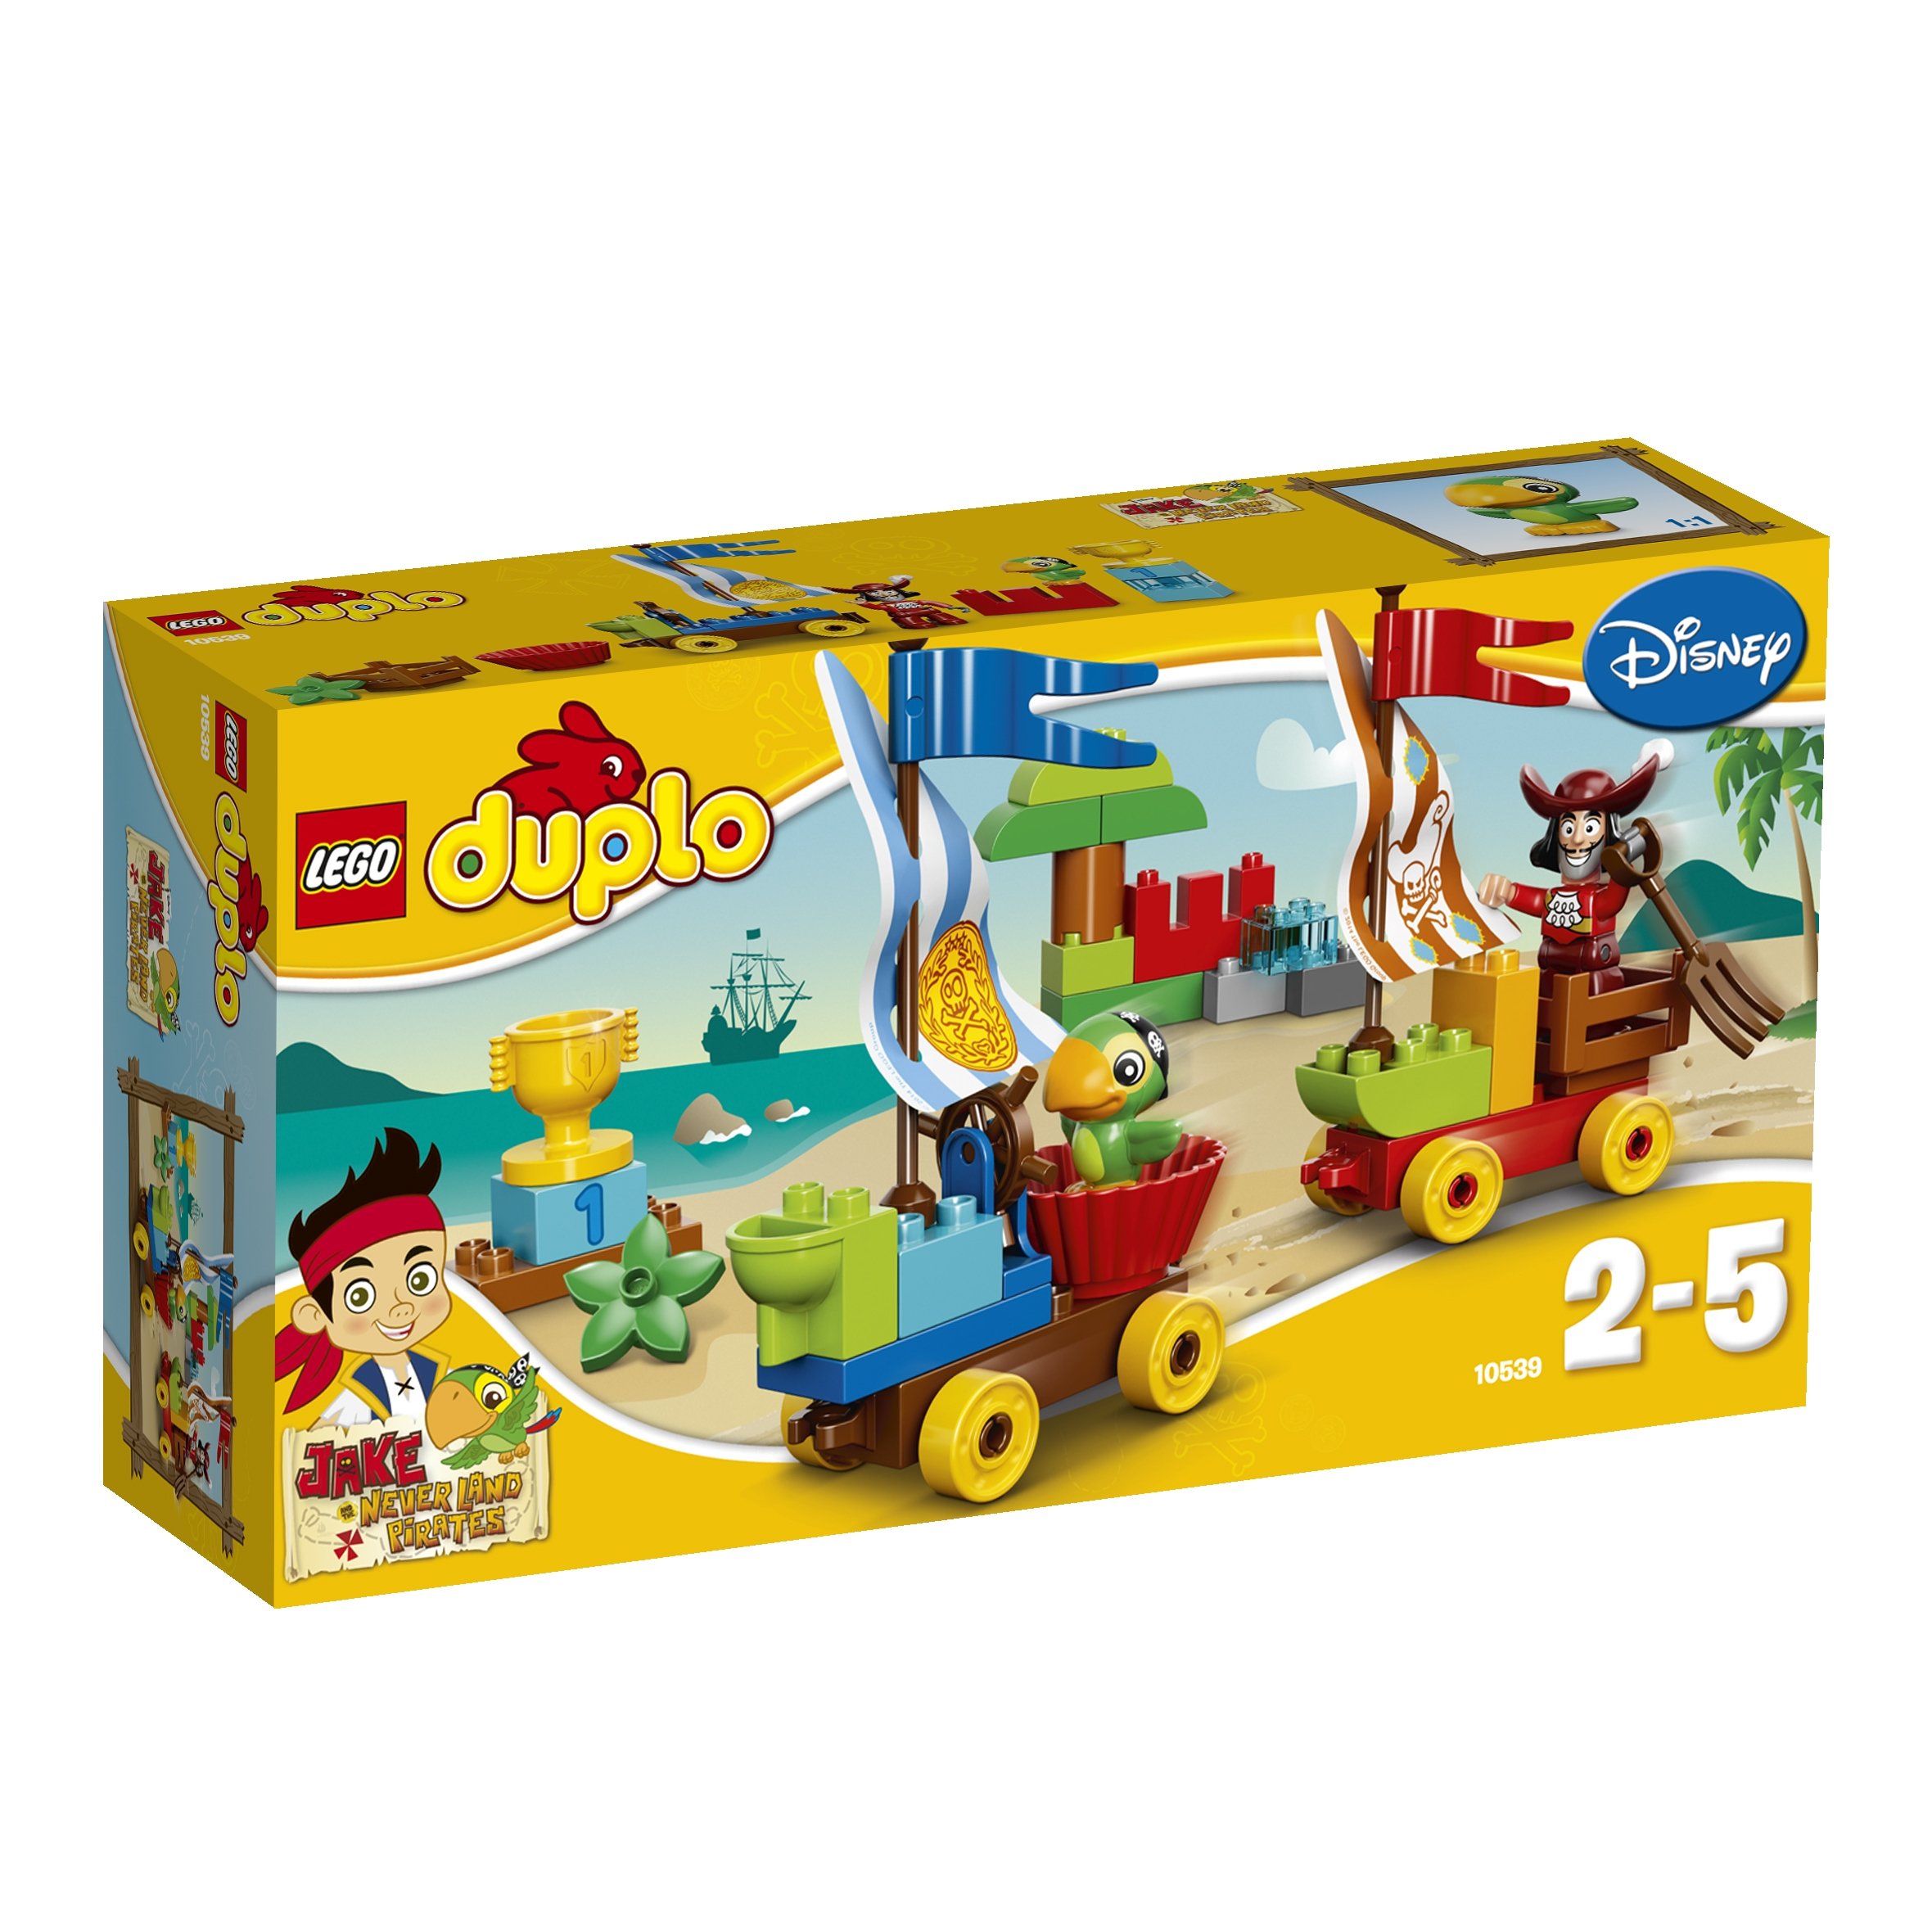 Lego Duplo Jake And The Never Land Pirates Beach Racing